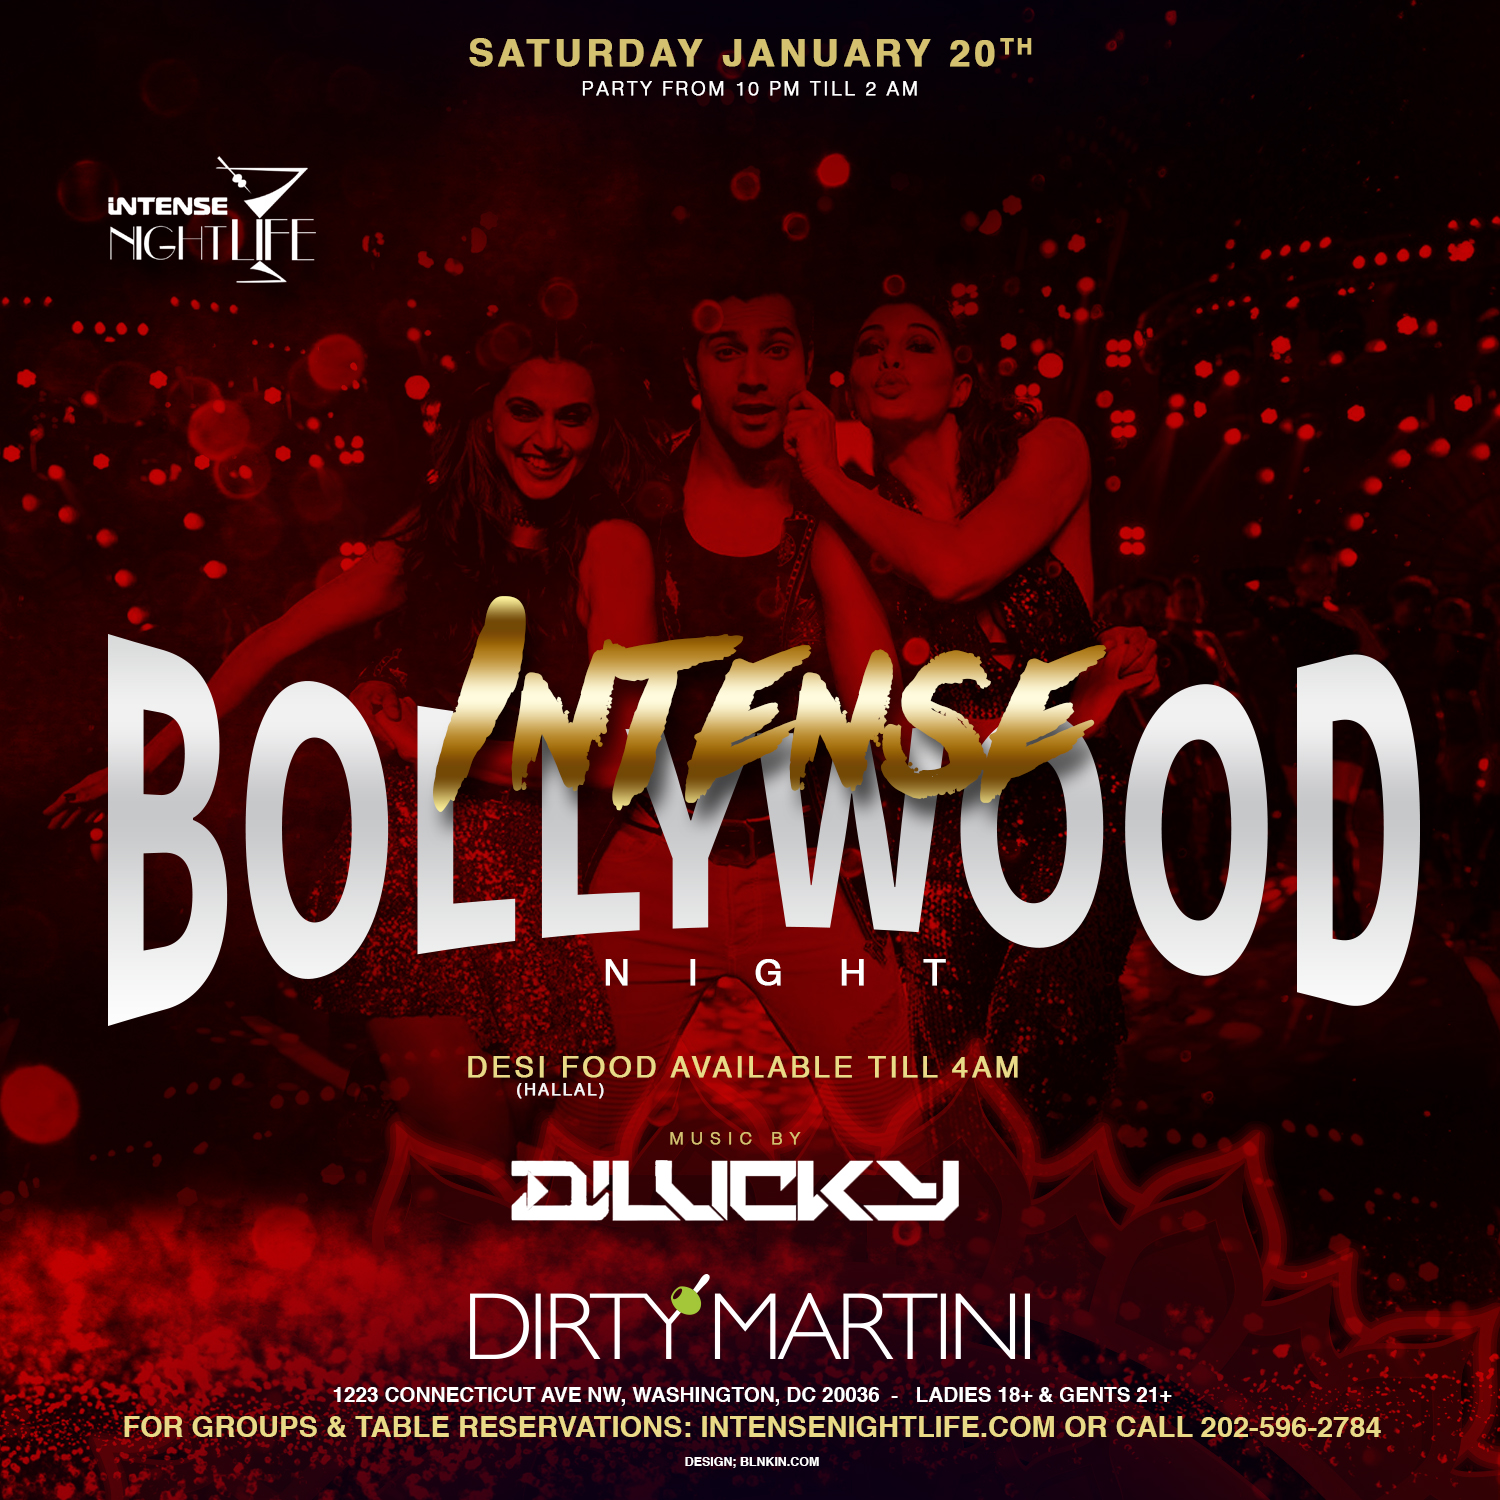 Intense Bollywood Night with DJ Lucky